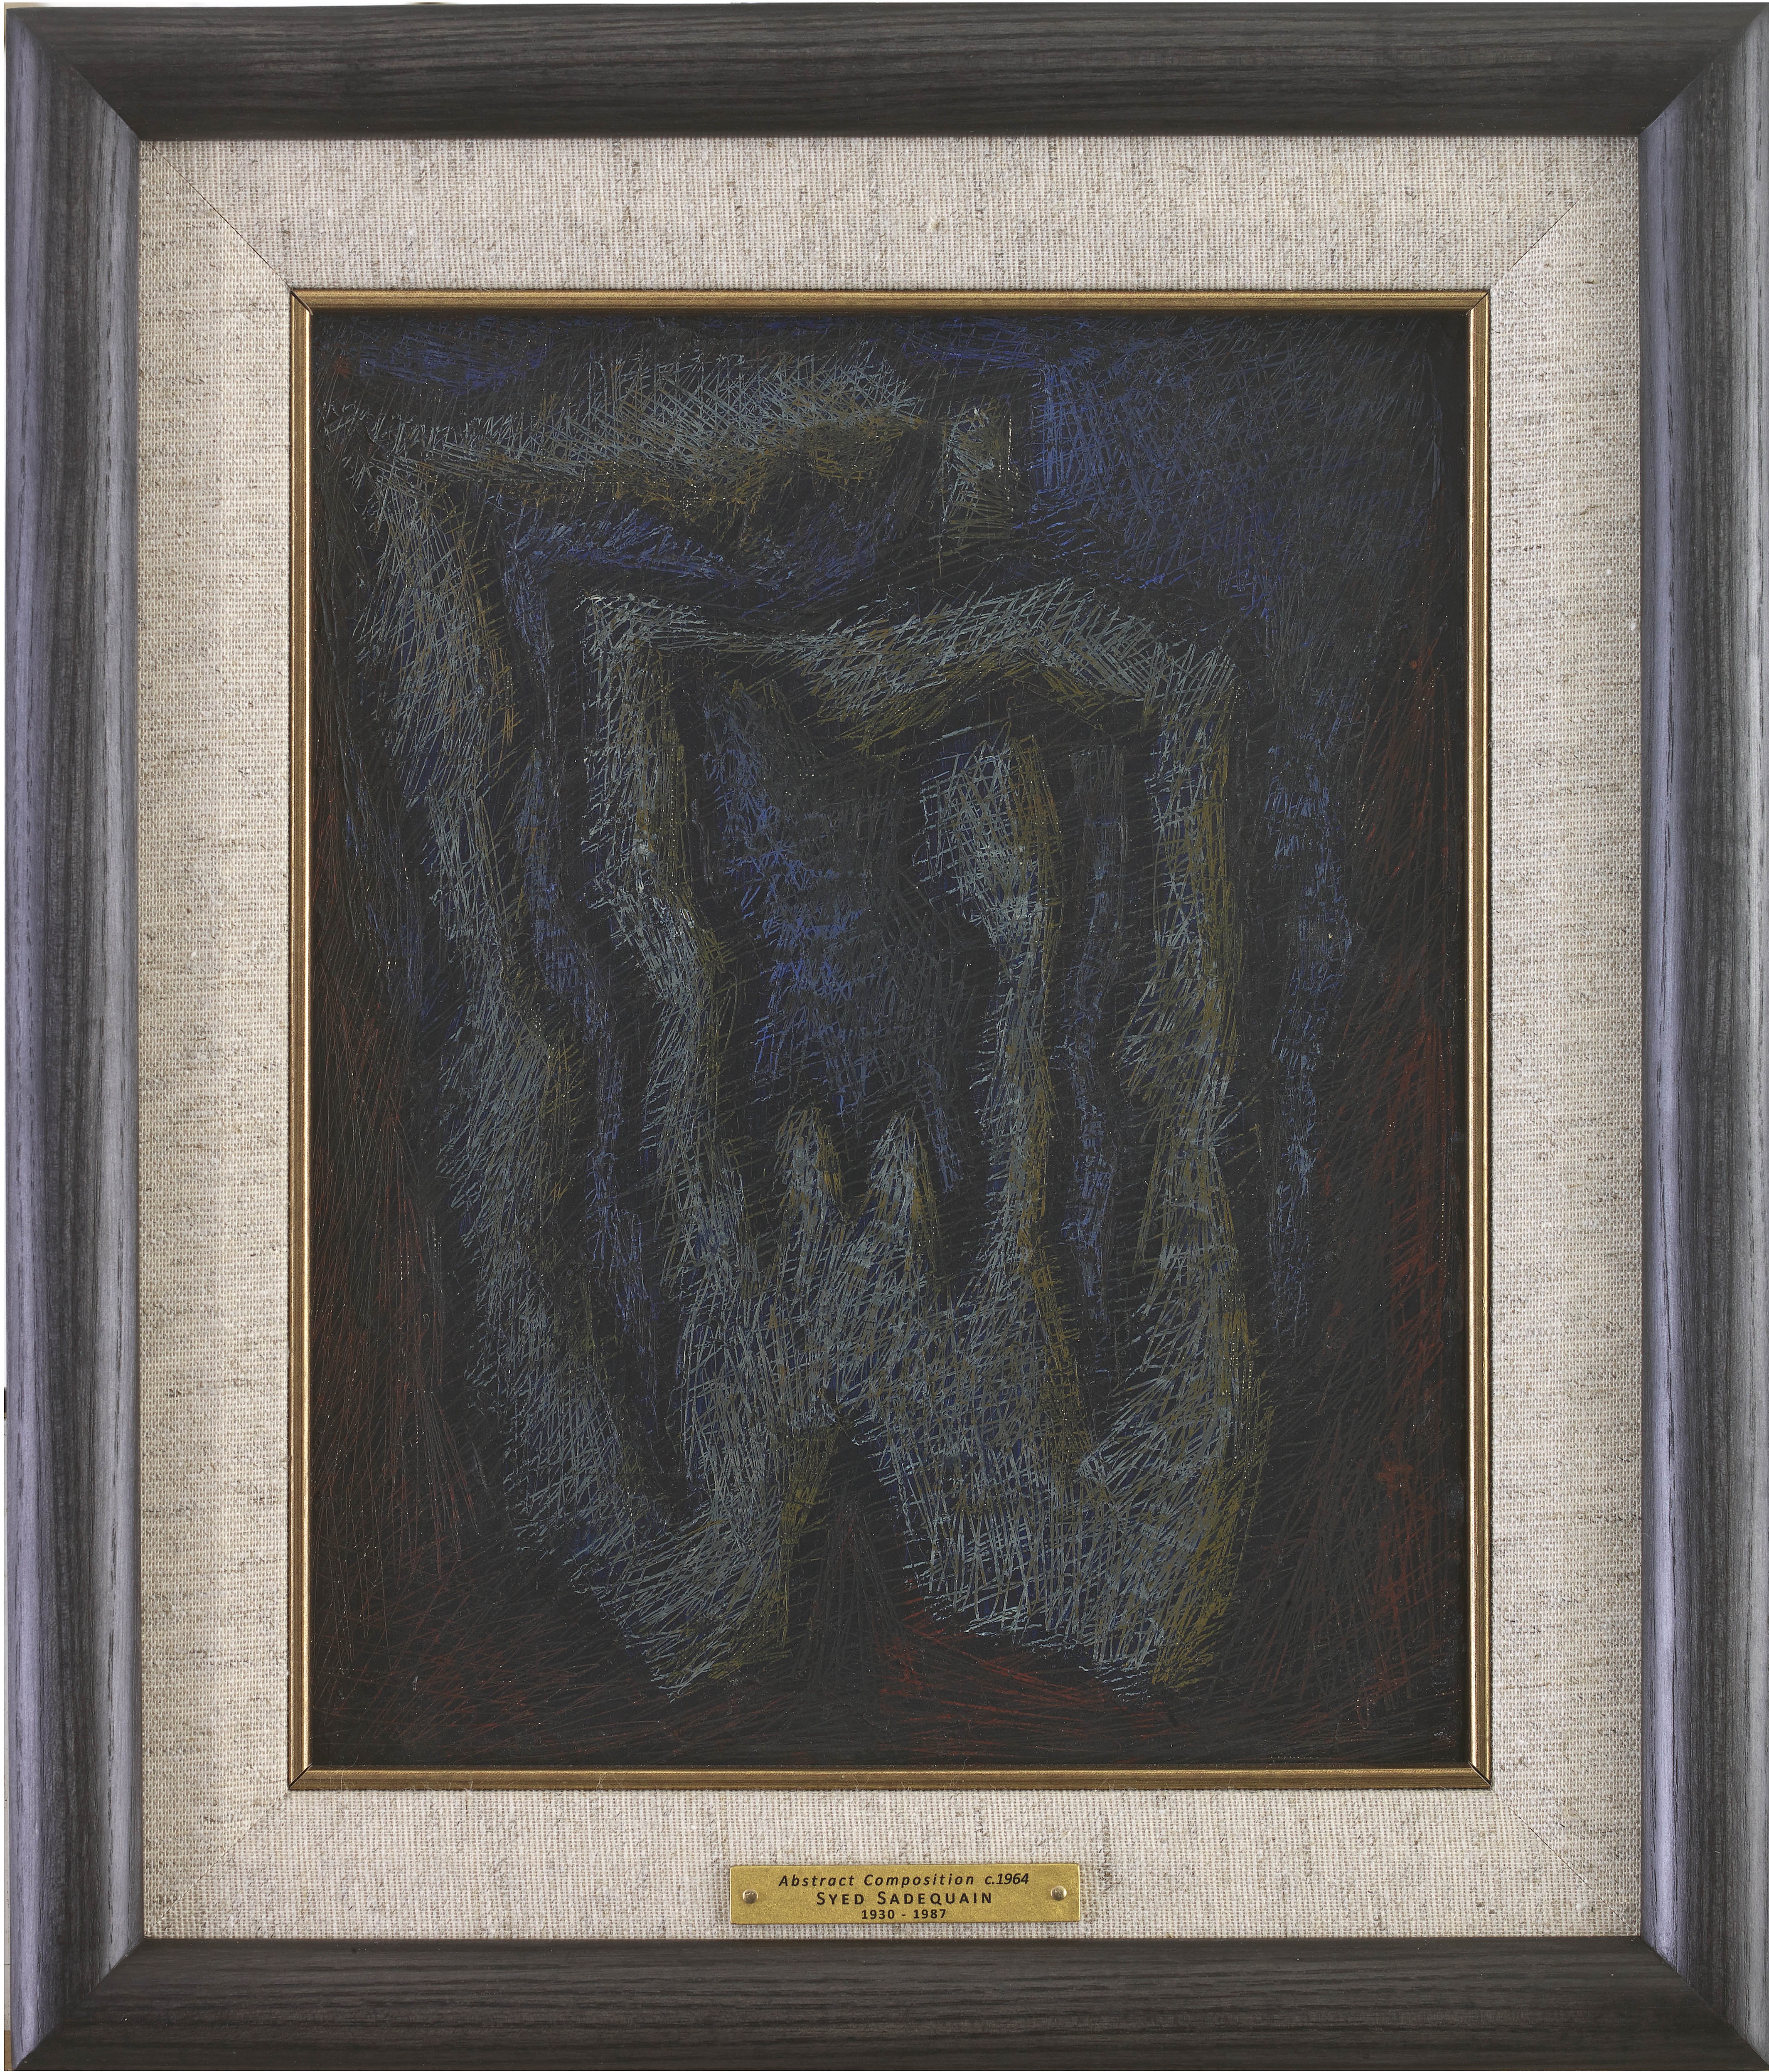 972480 Abstract Composition, c.1964, framed